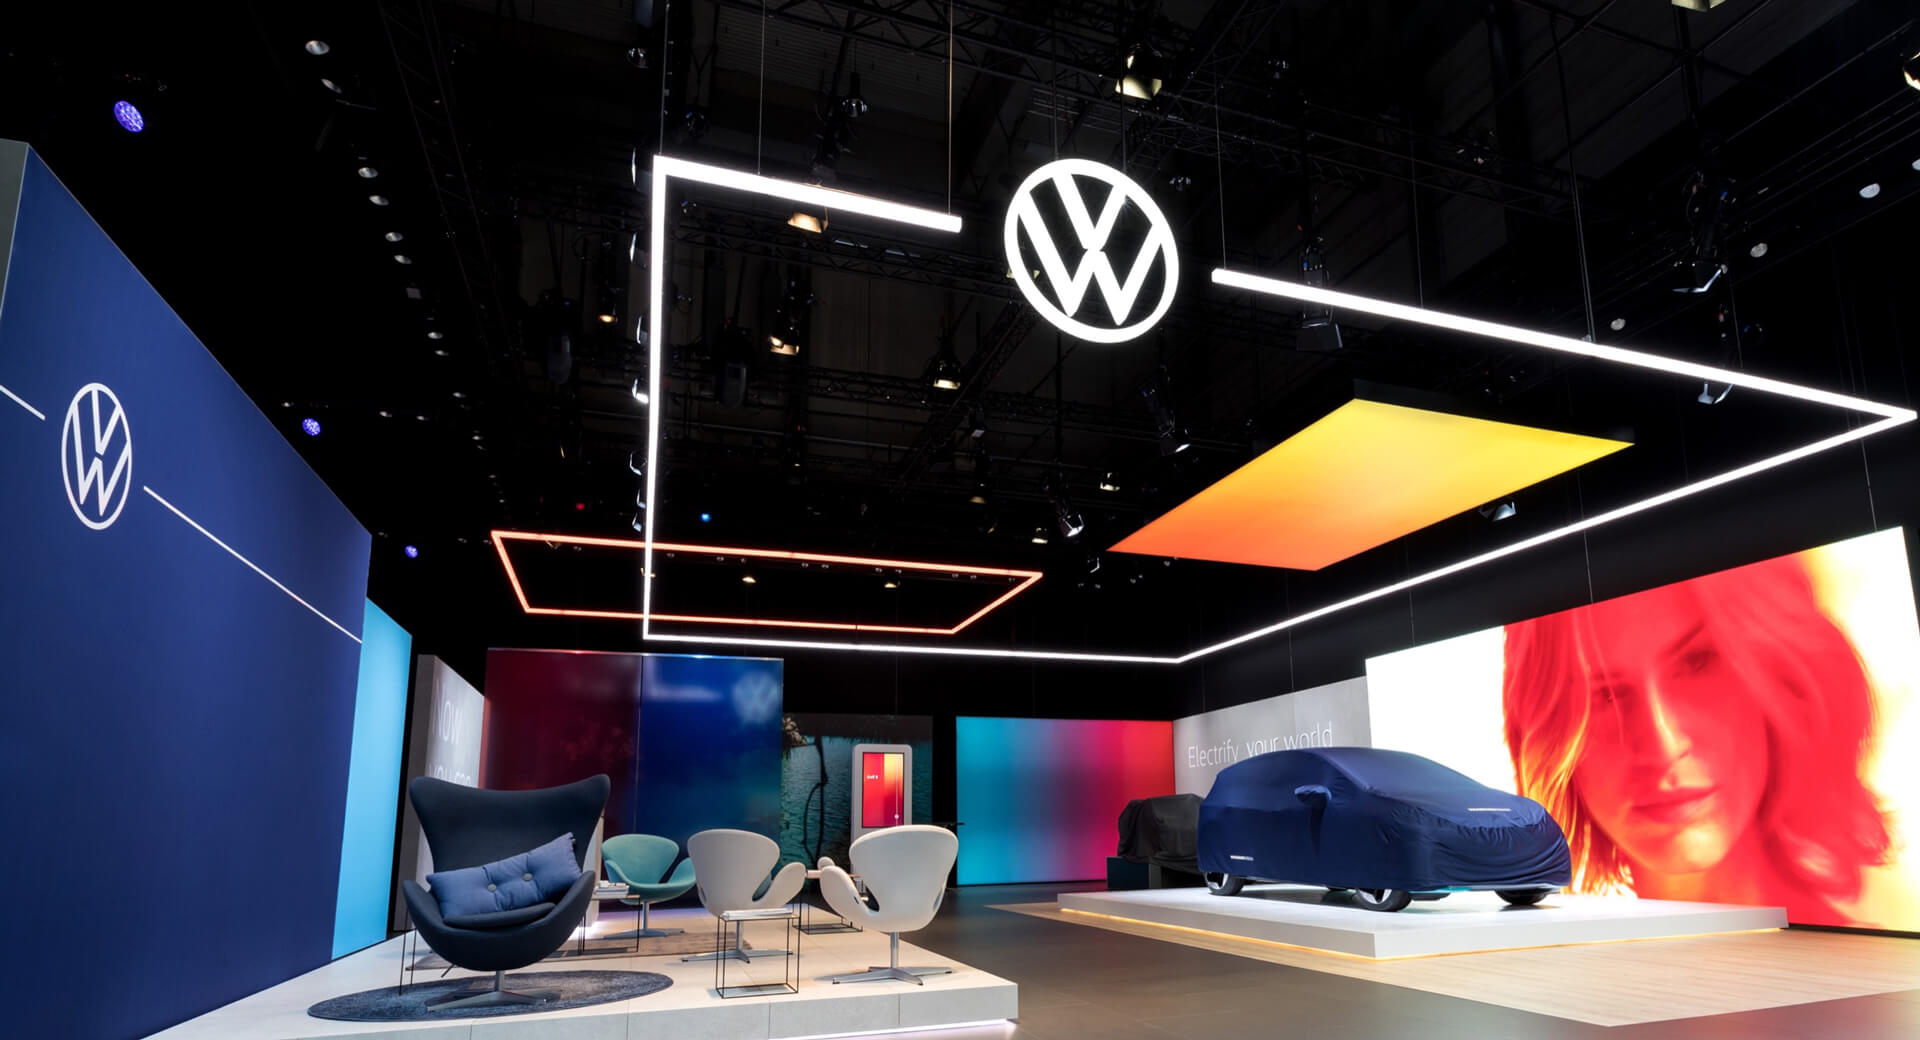 VW Brand 'Probably' Won't Attend The 2020 Paris Motor Show